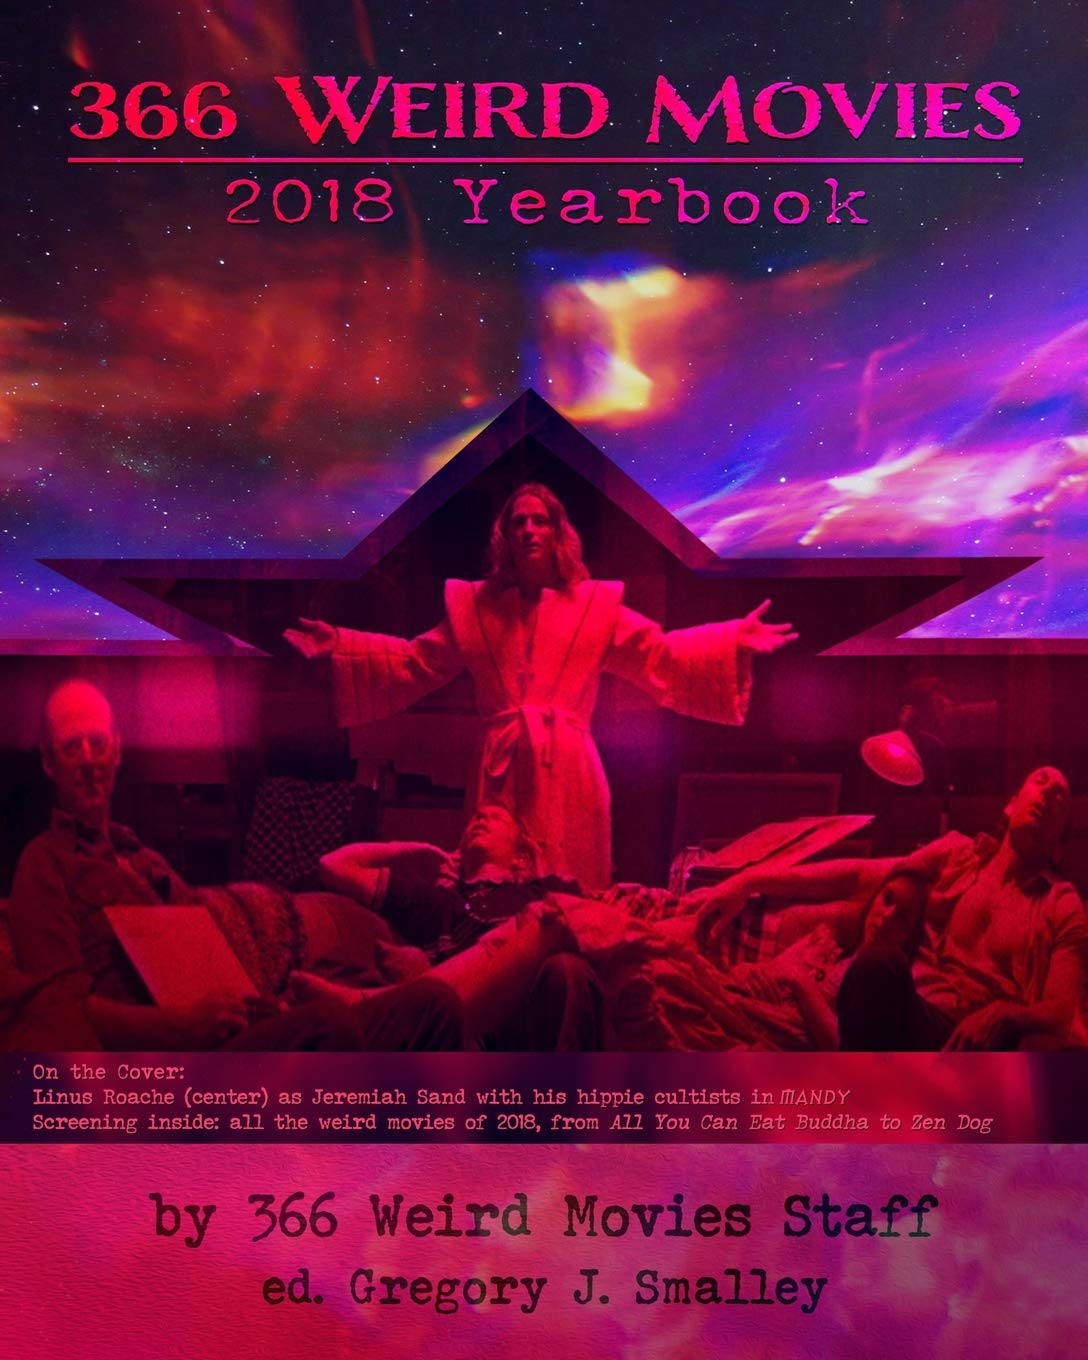 366 Weird Movies 2018 Yearbook Cover